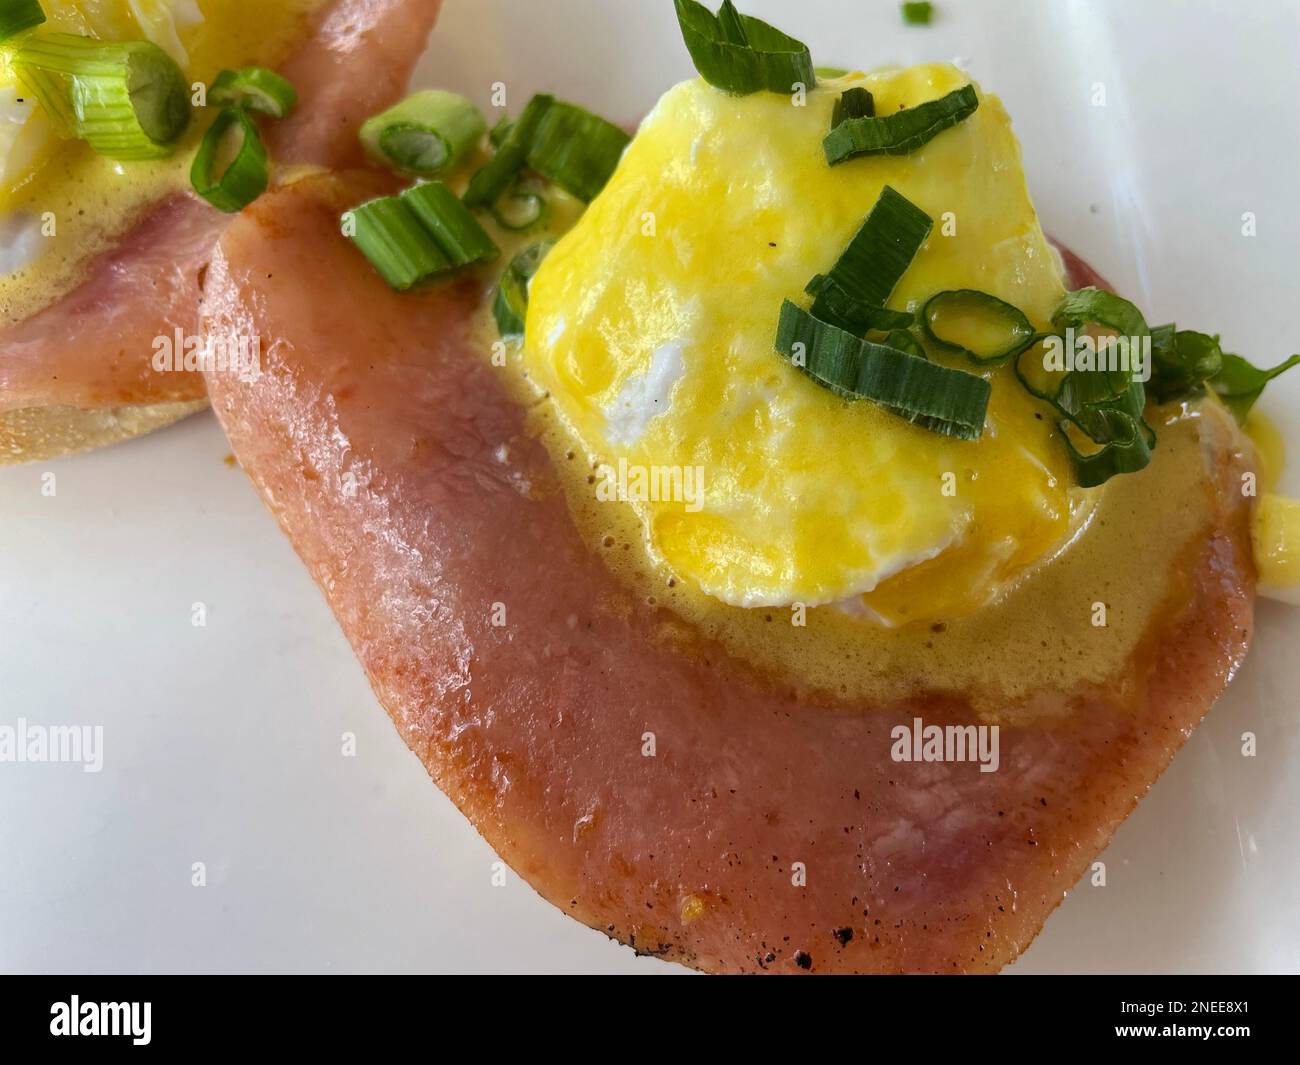 Close-up of a plate of eggs benedict Stock Photo